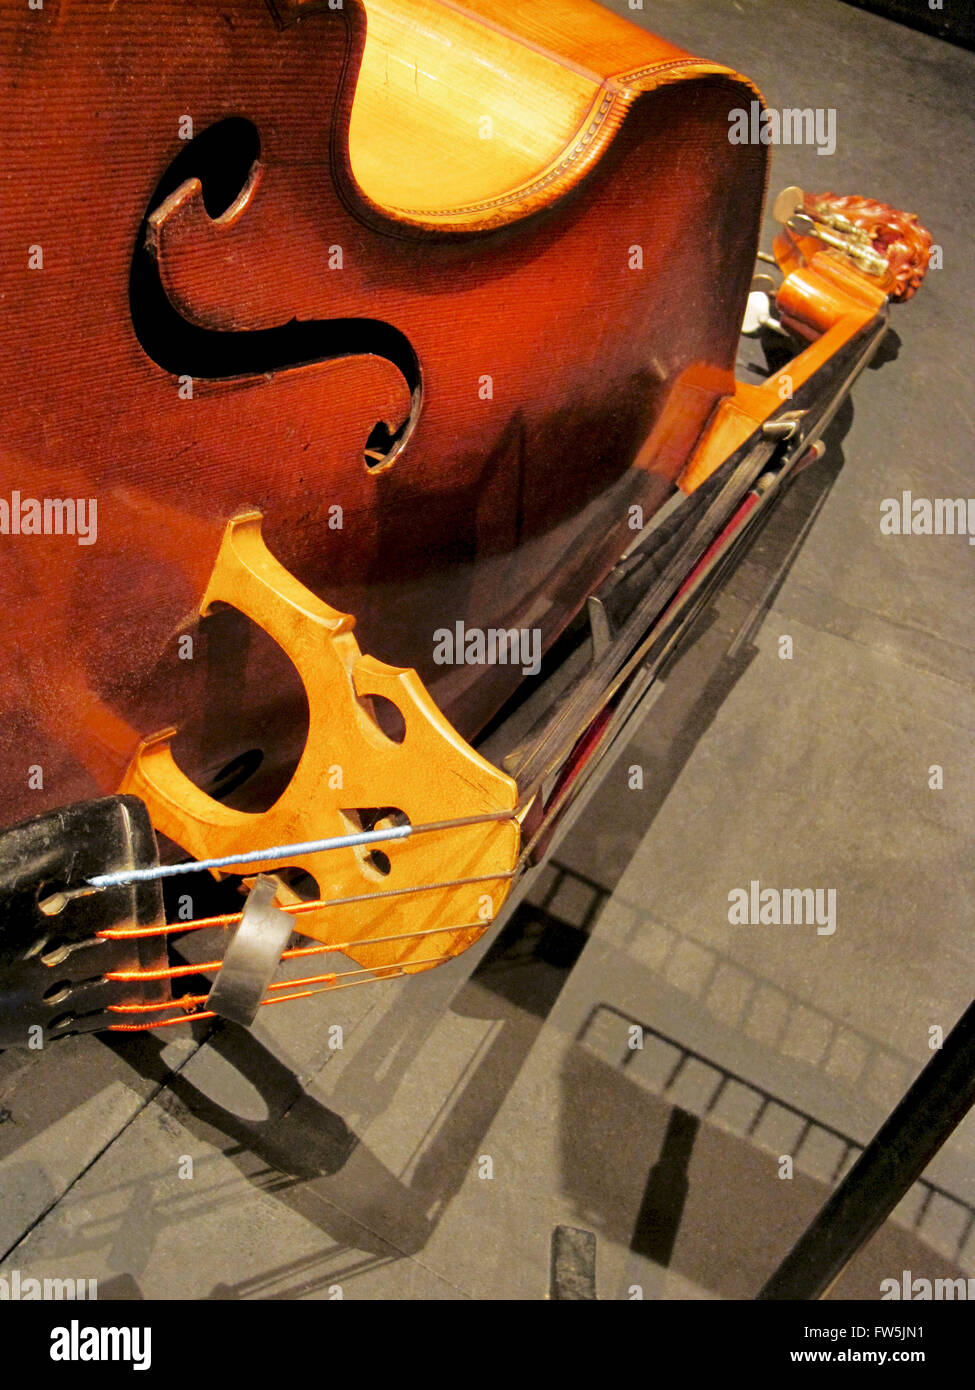 5-string double bass resting on its side, with bridge prominent, mute in 'ready' position below bridge, bow tucked away under strings, and shadows on floor, including shadow of music stand. Stock Photo